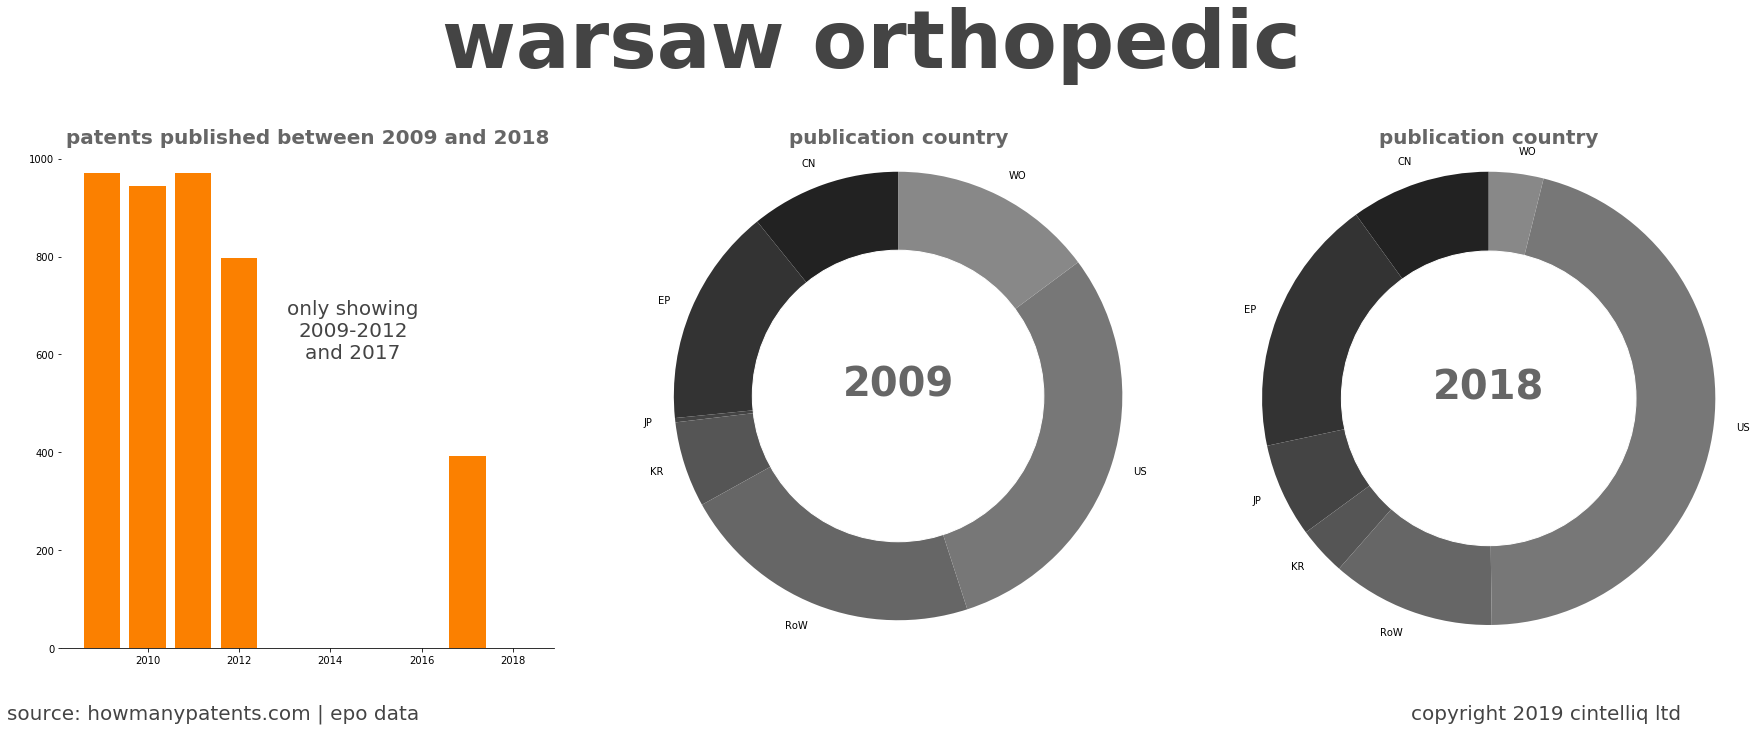 summary of patents for Warsaw Orthopedic